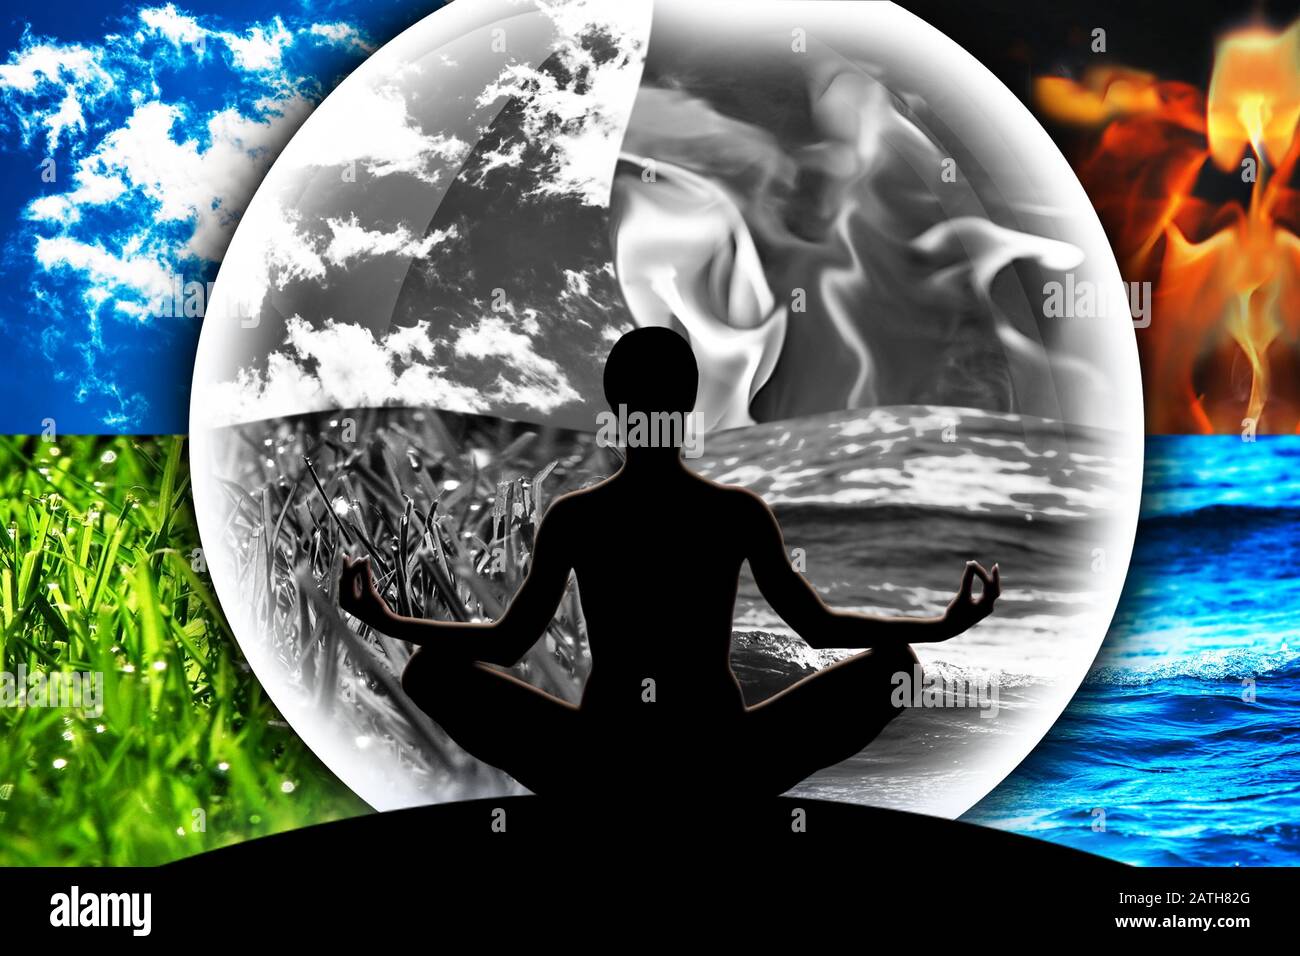 Female yoga figure in a transparent sphere, composed of four natural elements (water, fire, earth, air) in black and white on a background made of col Stock Photo